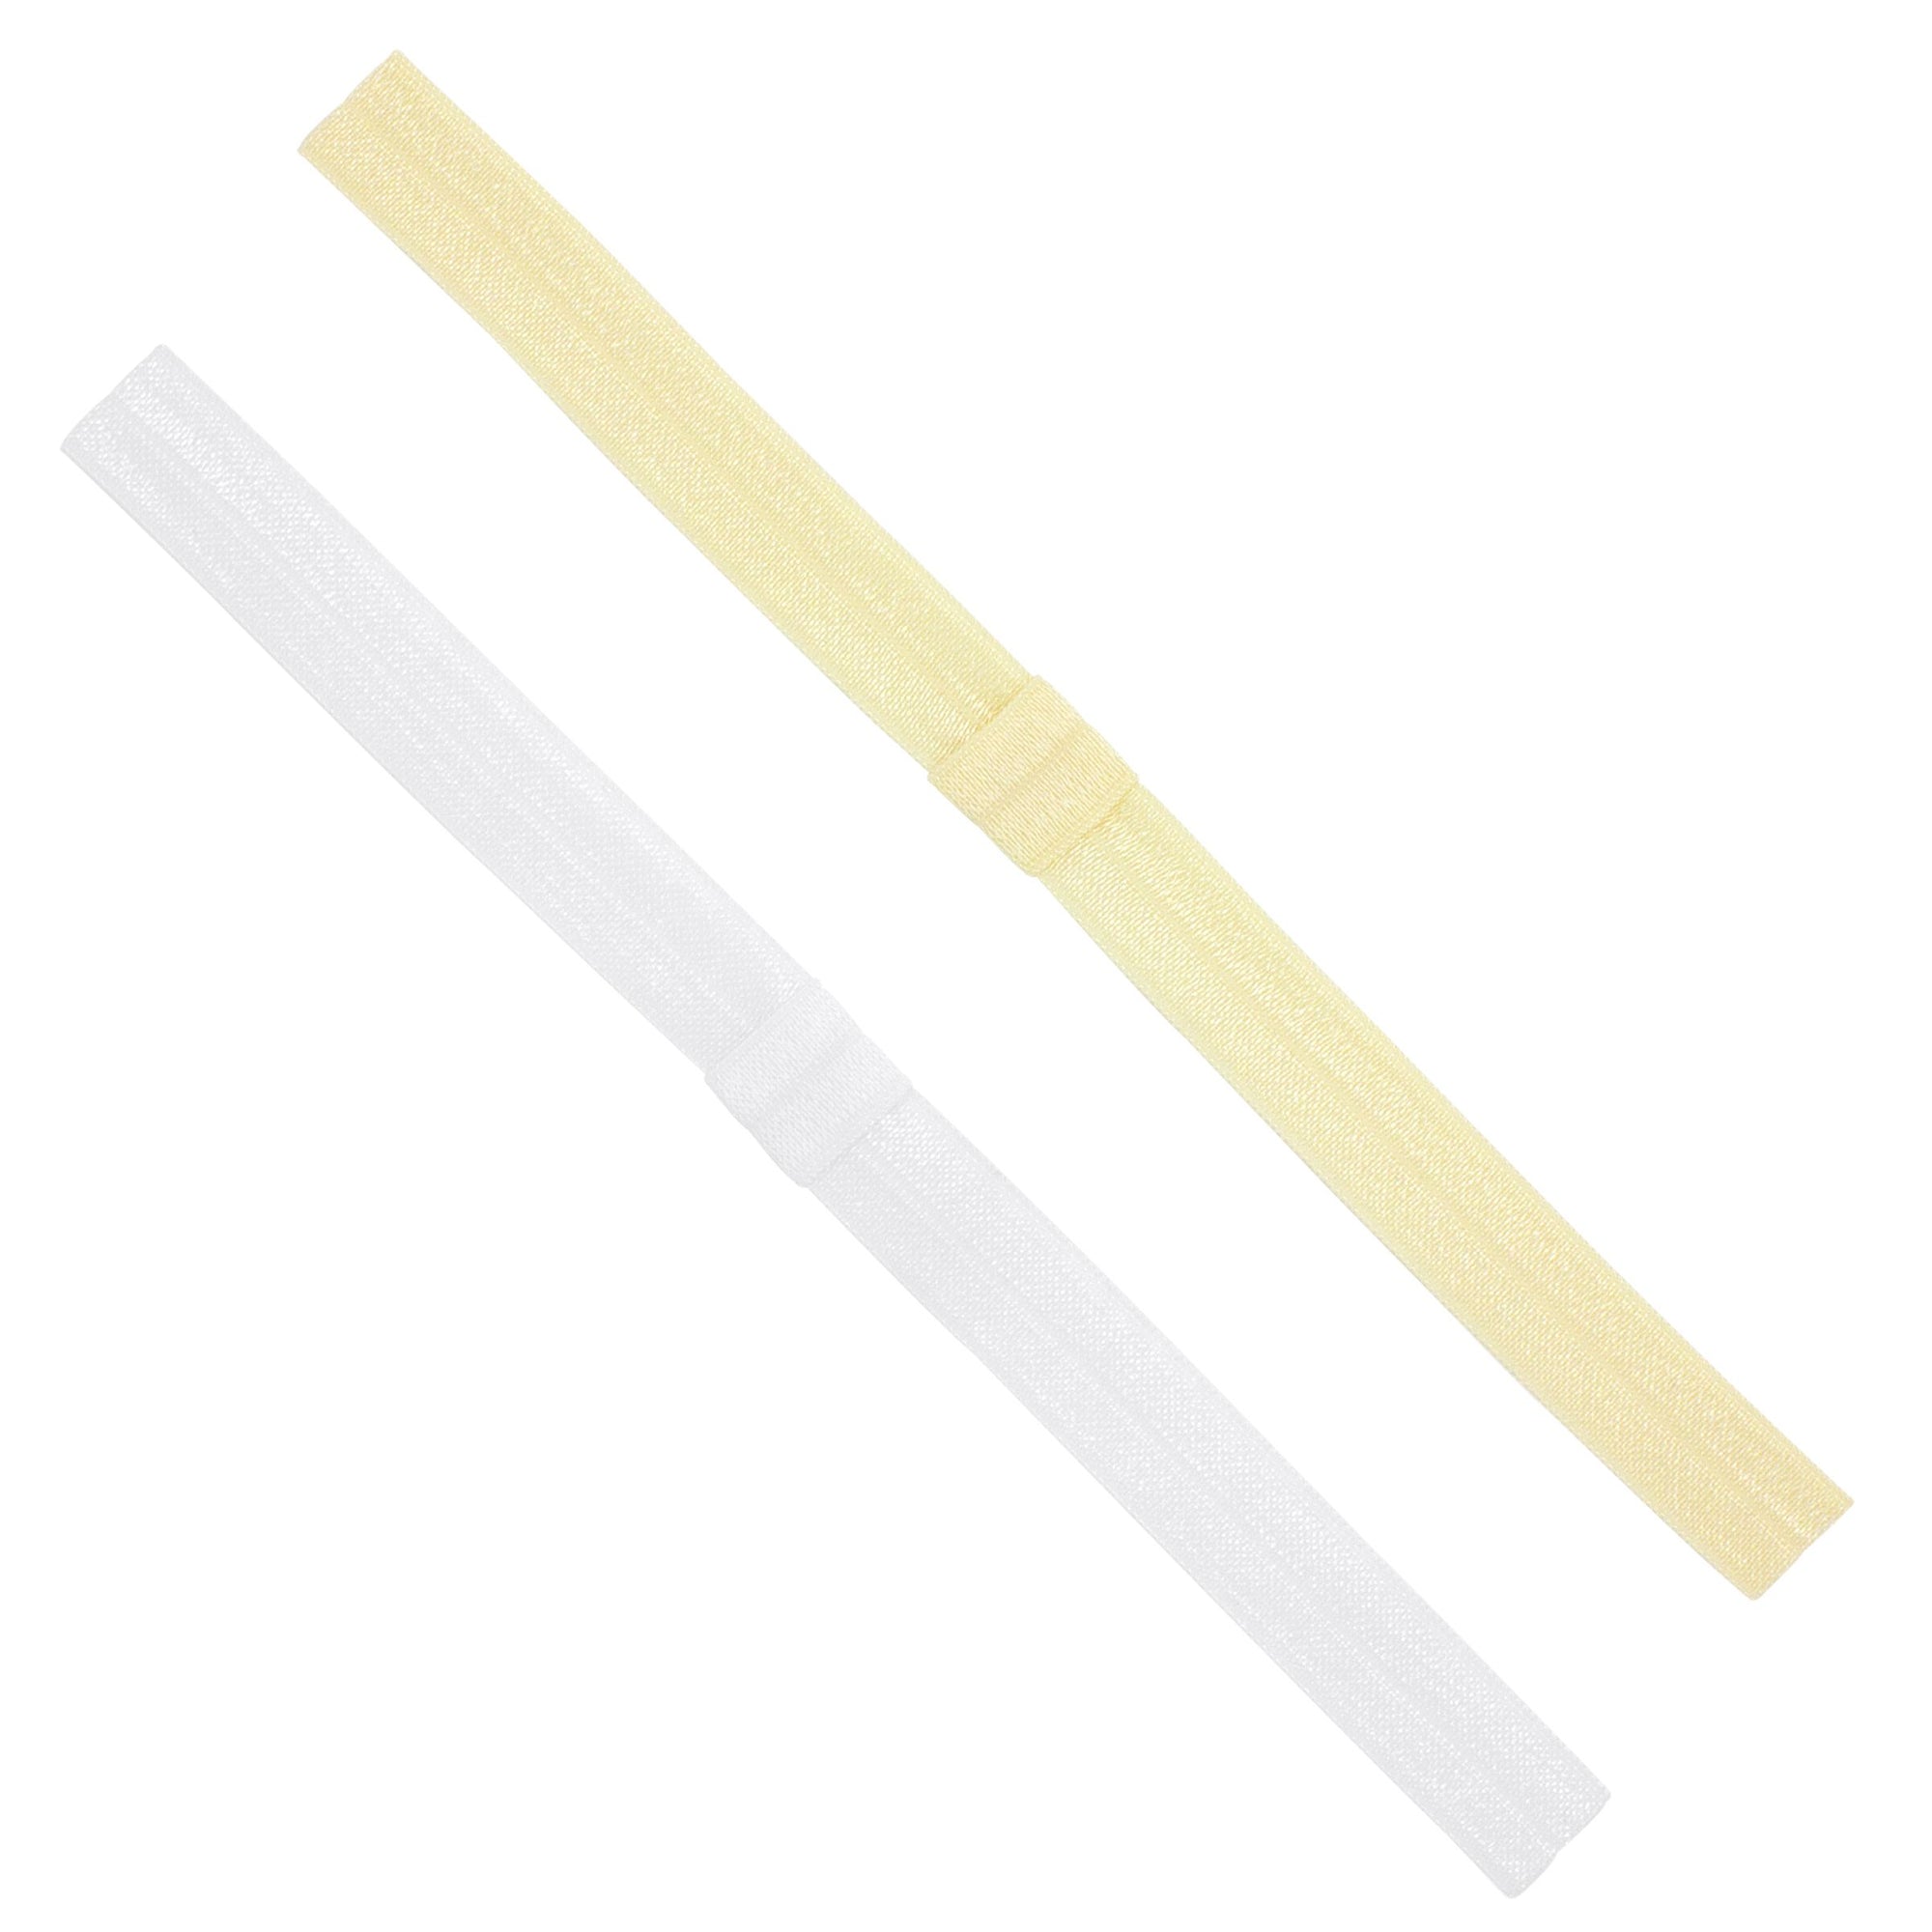 Add-A-Bow Elastic Girls Baby Bands Two Pack | White and Ivory